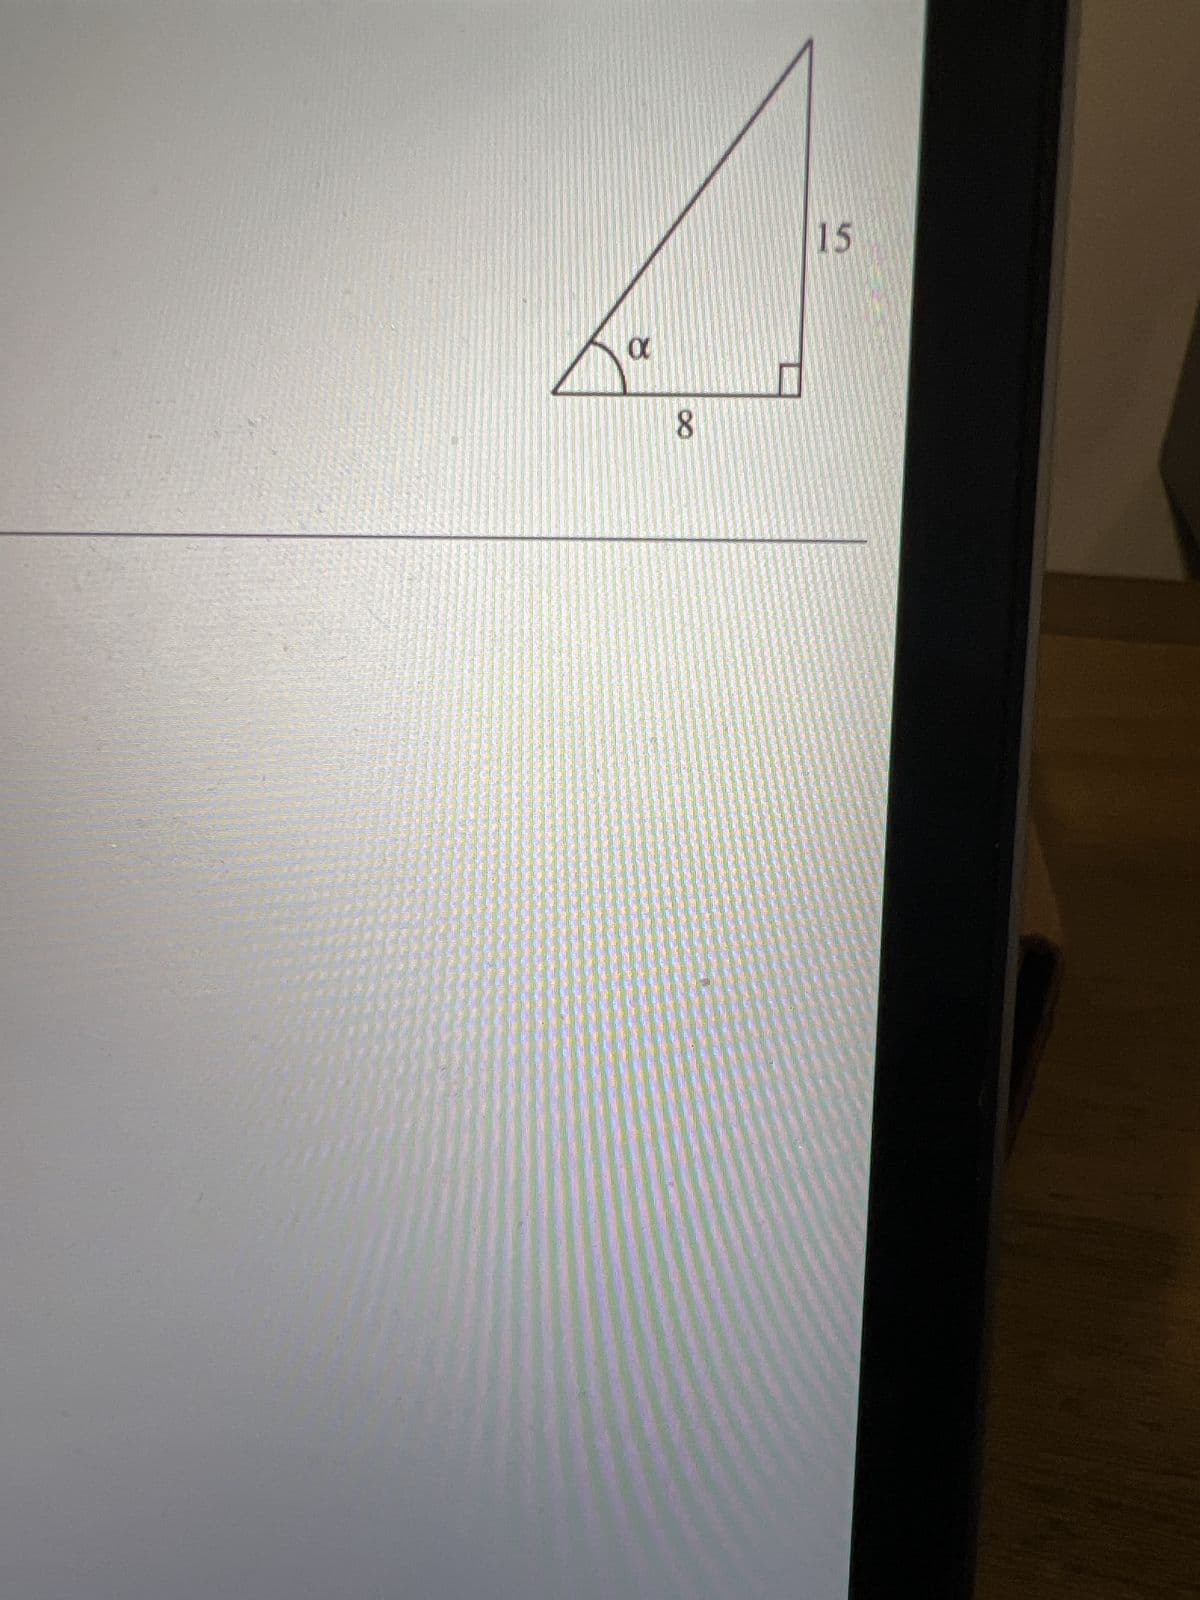 Use the adjacent figure to find the exact value of the following trigonometric function.
COS
COS
a
(Simplify your answer, including any radicals. Use integers or fractions for any numbers in the expression.
80
F3
MacBook Air
a
A
F4
F5